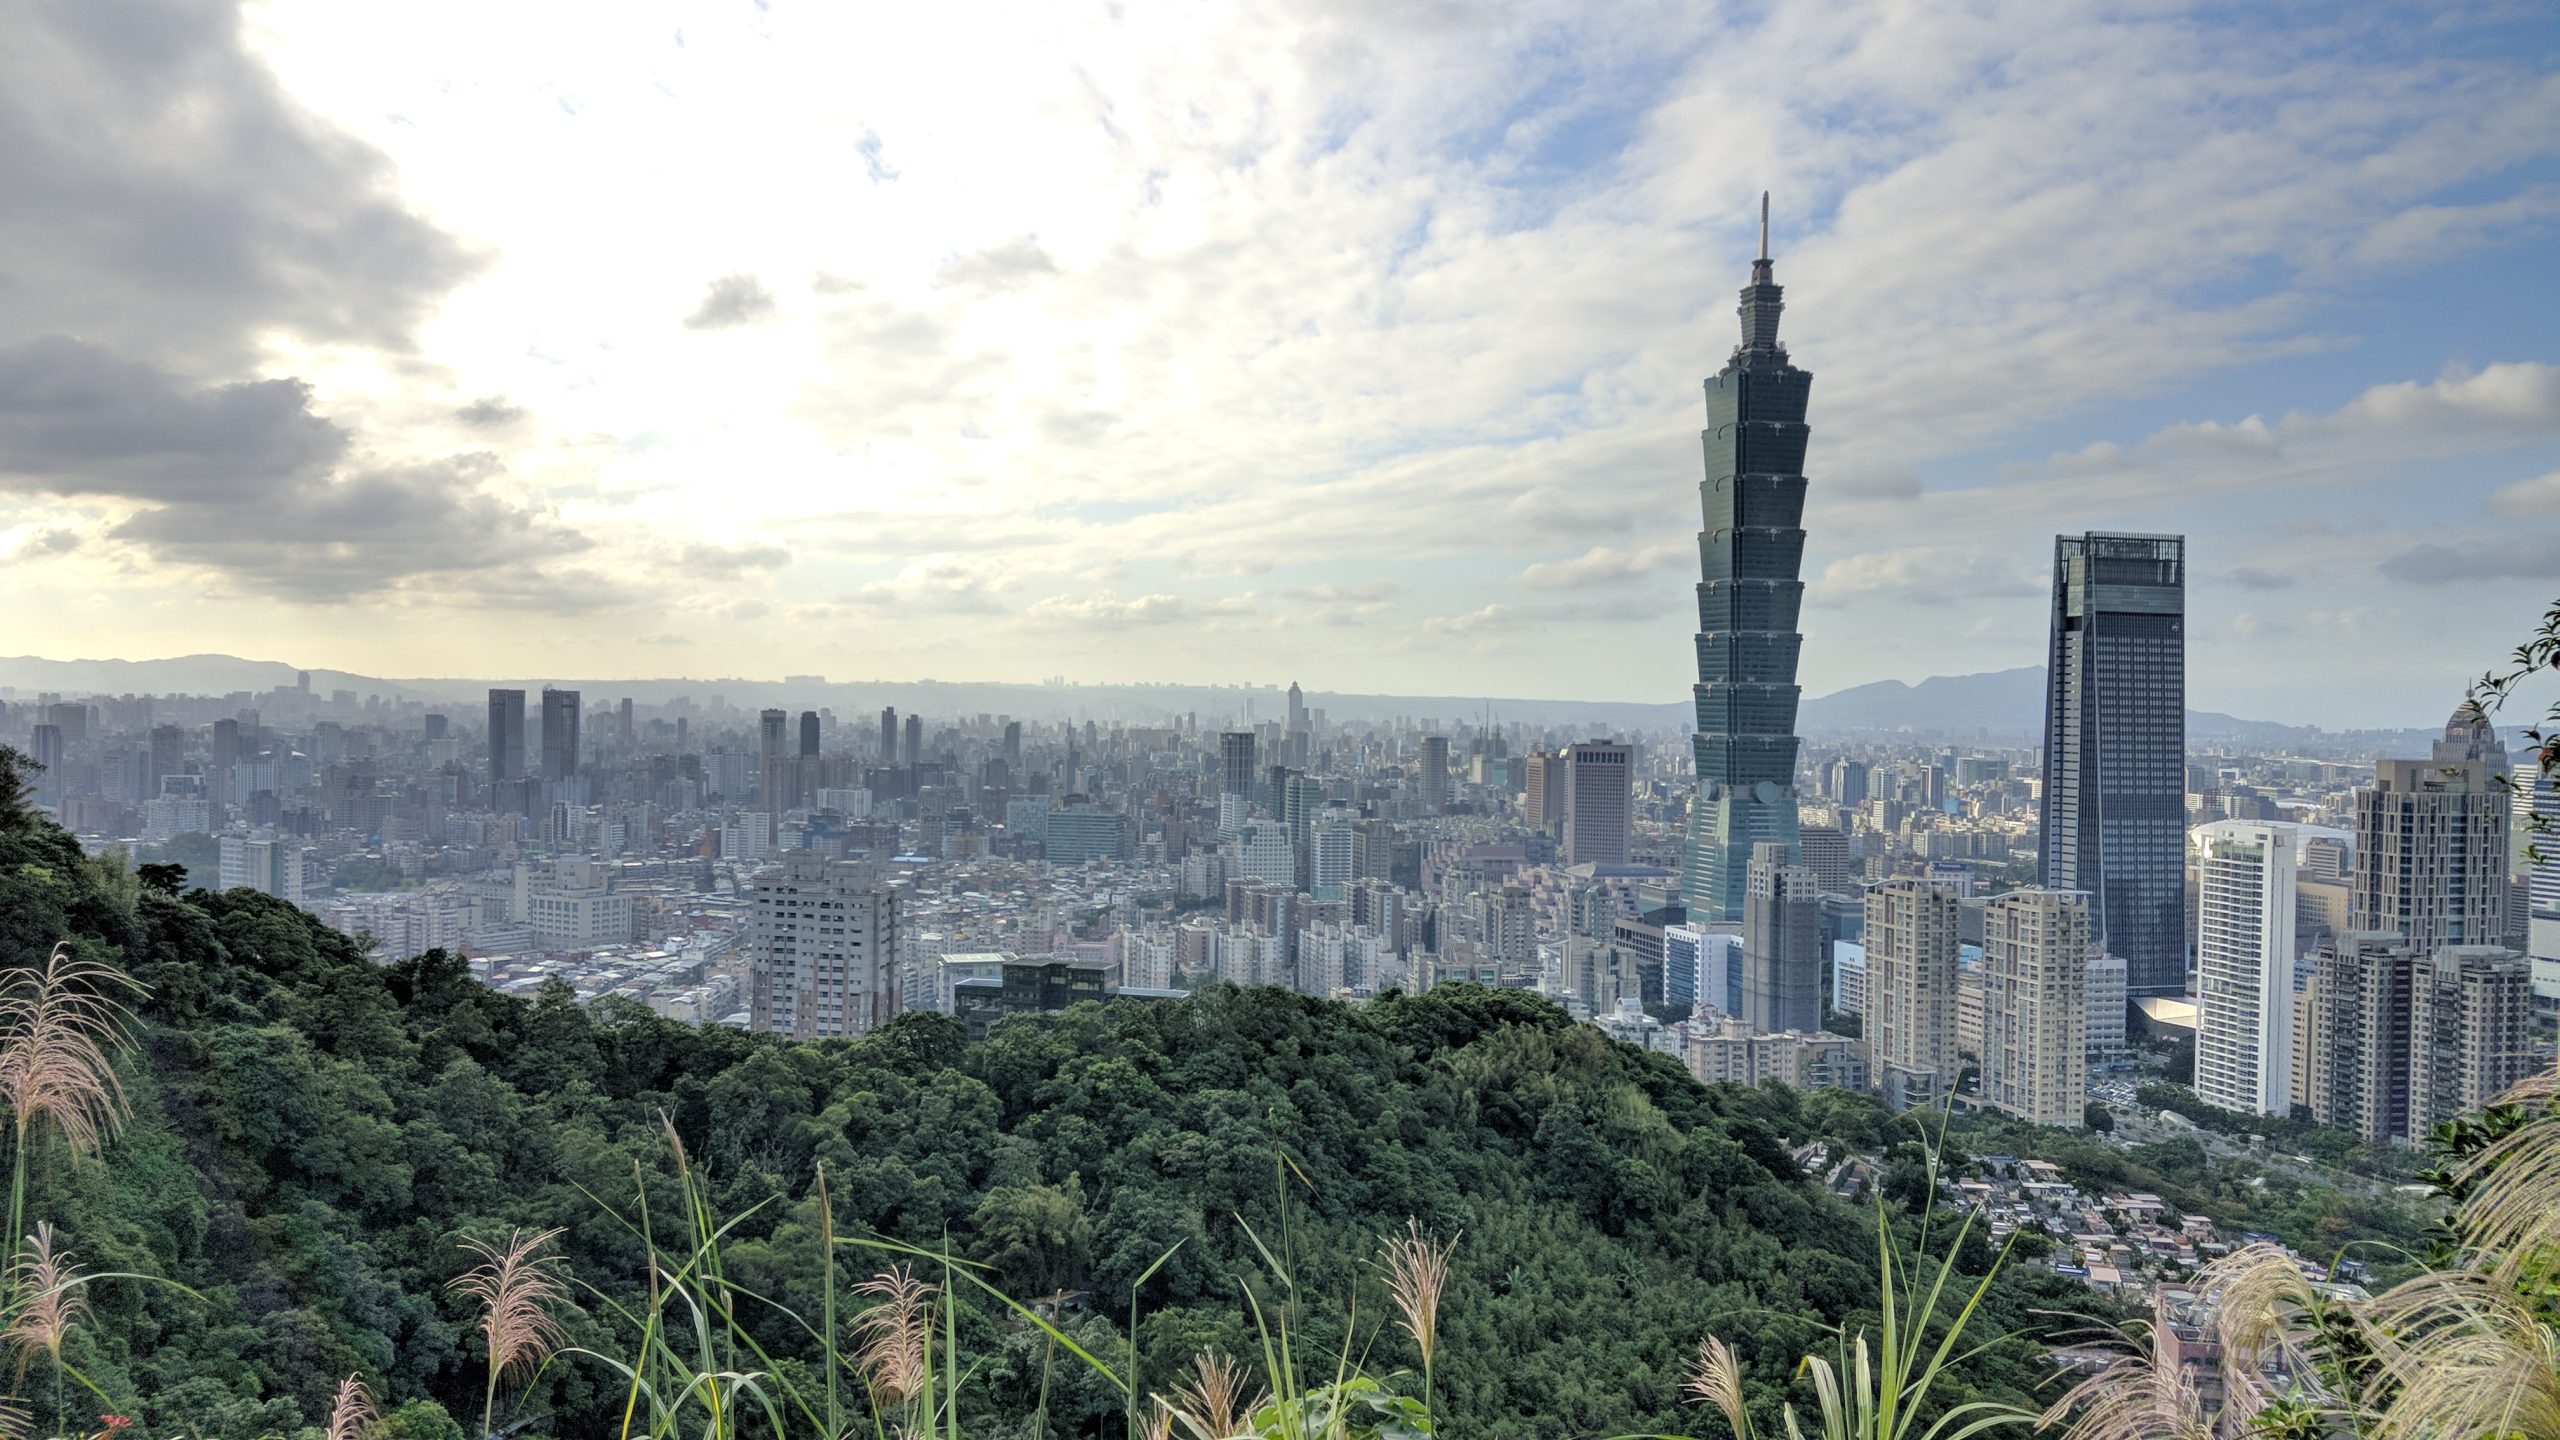 Taipei 101 – one of the tallest green buildings in the world